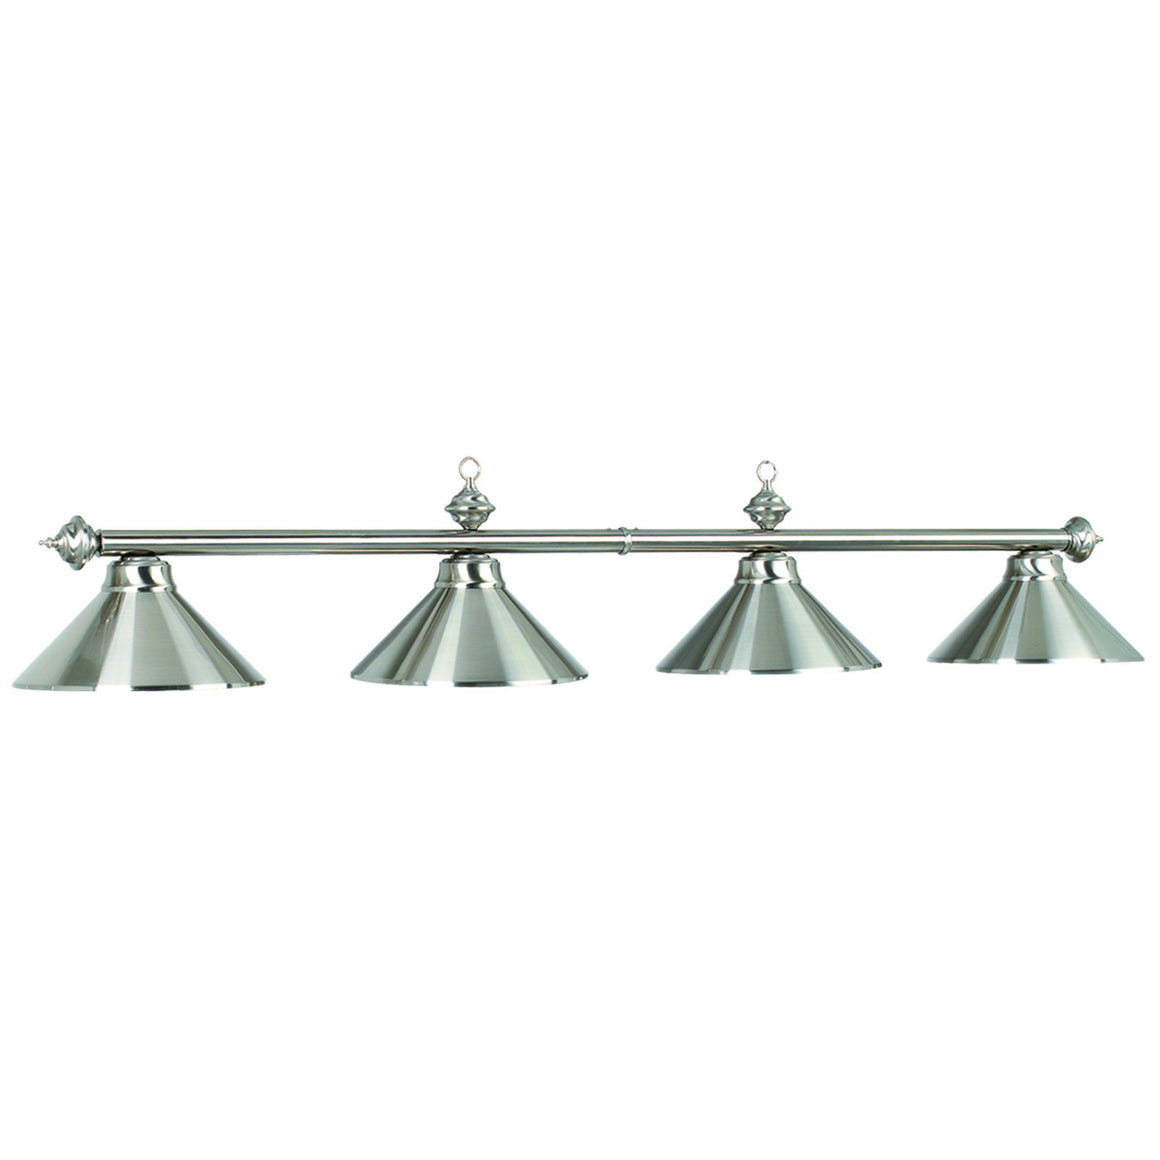 Value Priced 4 Light Fixture Metal Stainless Finish - Man Cave Boutique